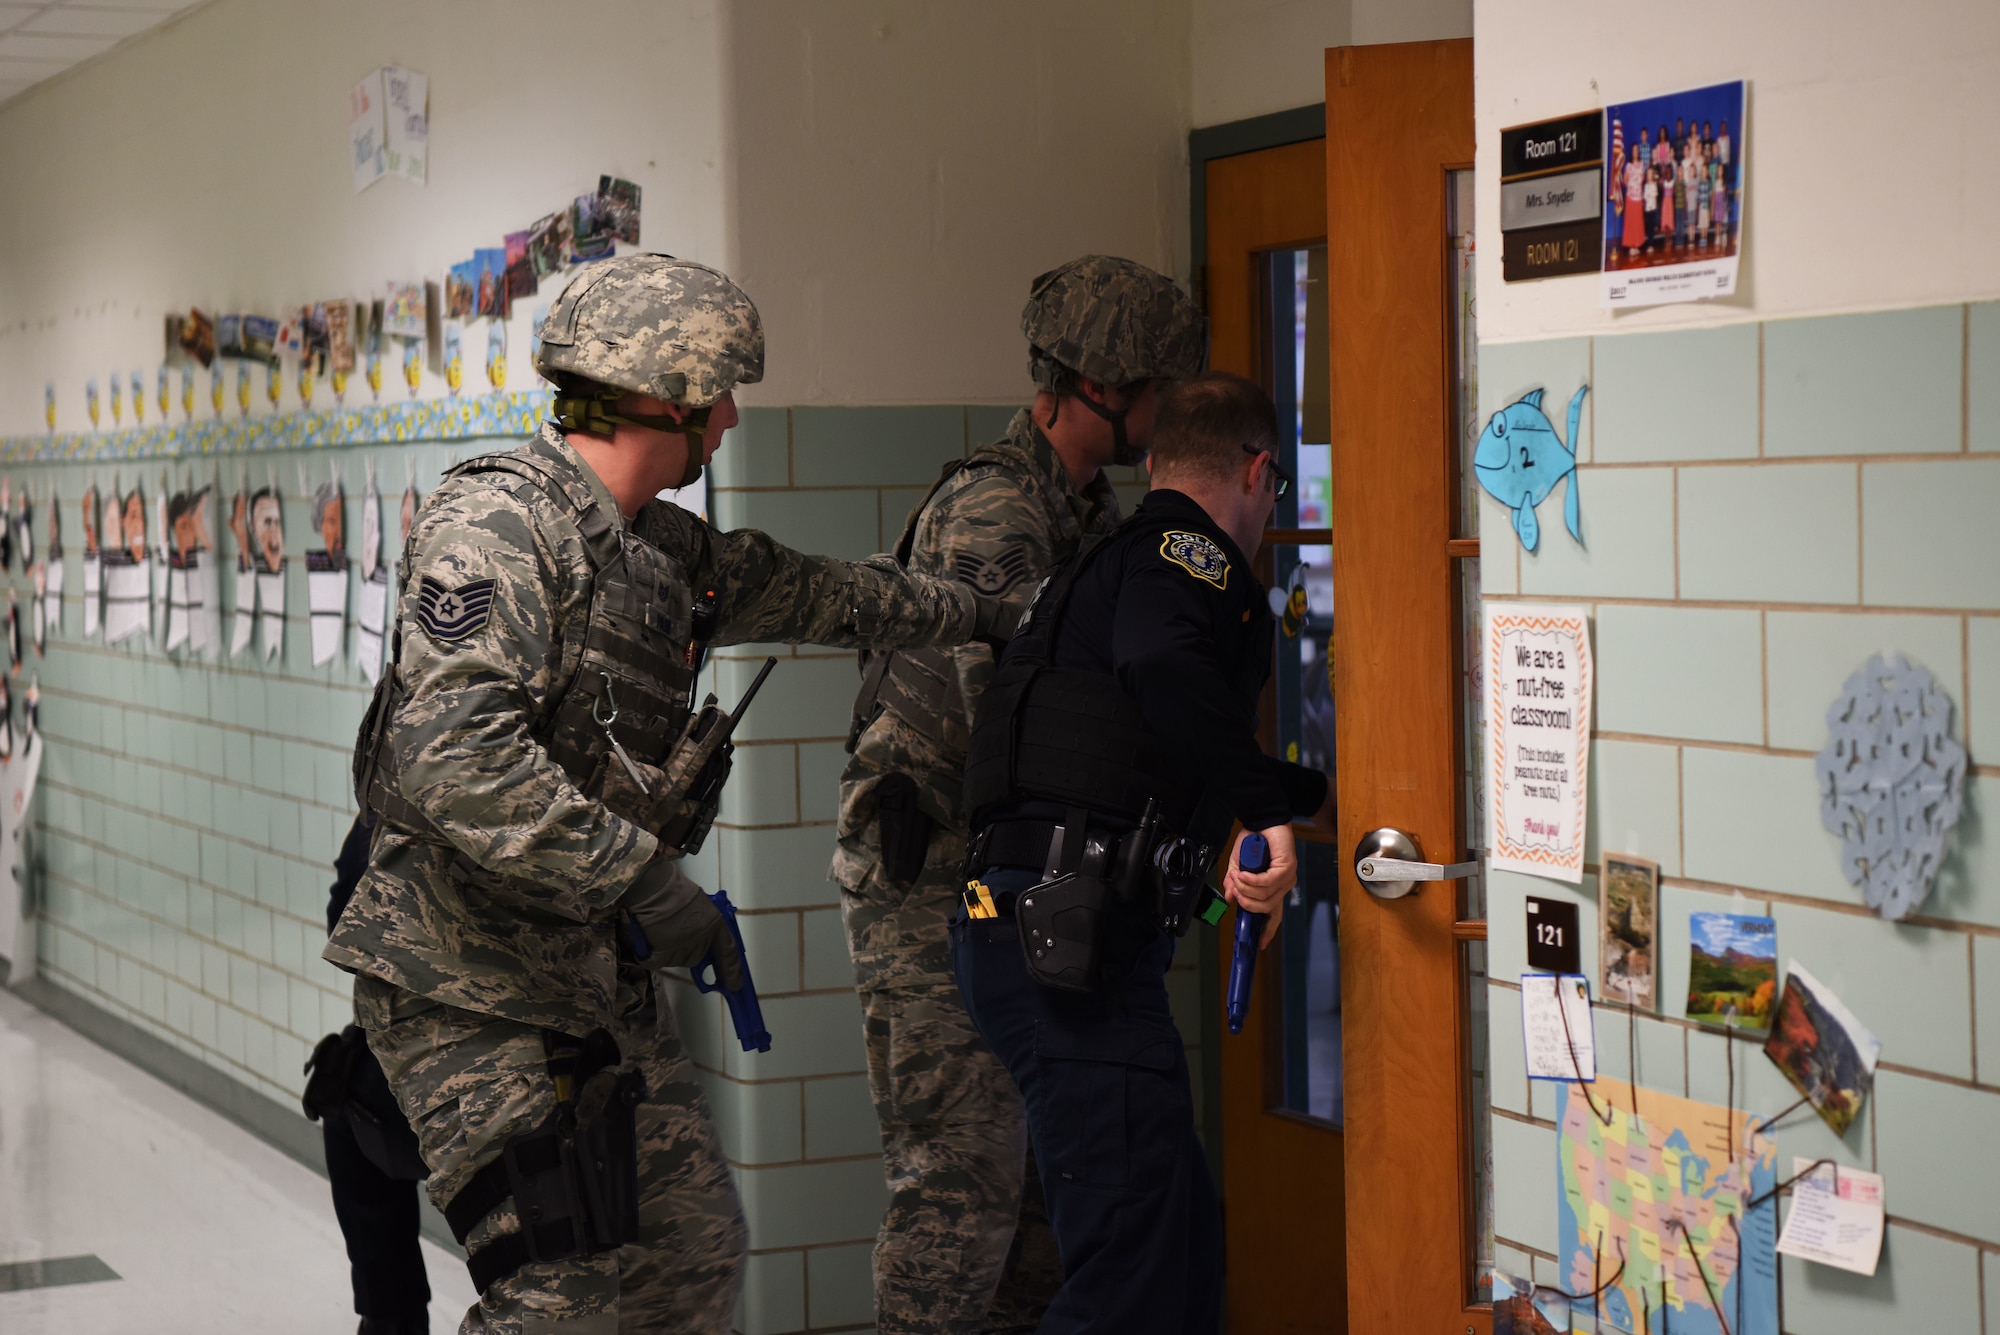 From the left, Tech. Sgt. Adam Paini, 436th Security Forces Squadron, Staff Sgt. Brandon Trapp, 436th SFS, and Officer Justin Viens, 436th SFS supervisory police officer, clear rooms during an active shooter exercise Feb. 26, 2018, at the George S. Welch Elementary School and Dover Air Force Base Middle School at Dover AFB, Del. The 436th Inspector General office evaluated school faculty and Security Forces on their response procedures. (U.S. Air Force photo by Airman 1st Class Zoe M. Wockenfuss)